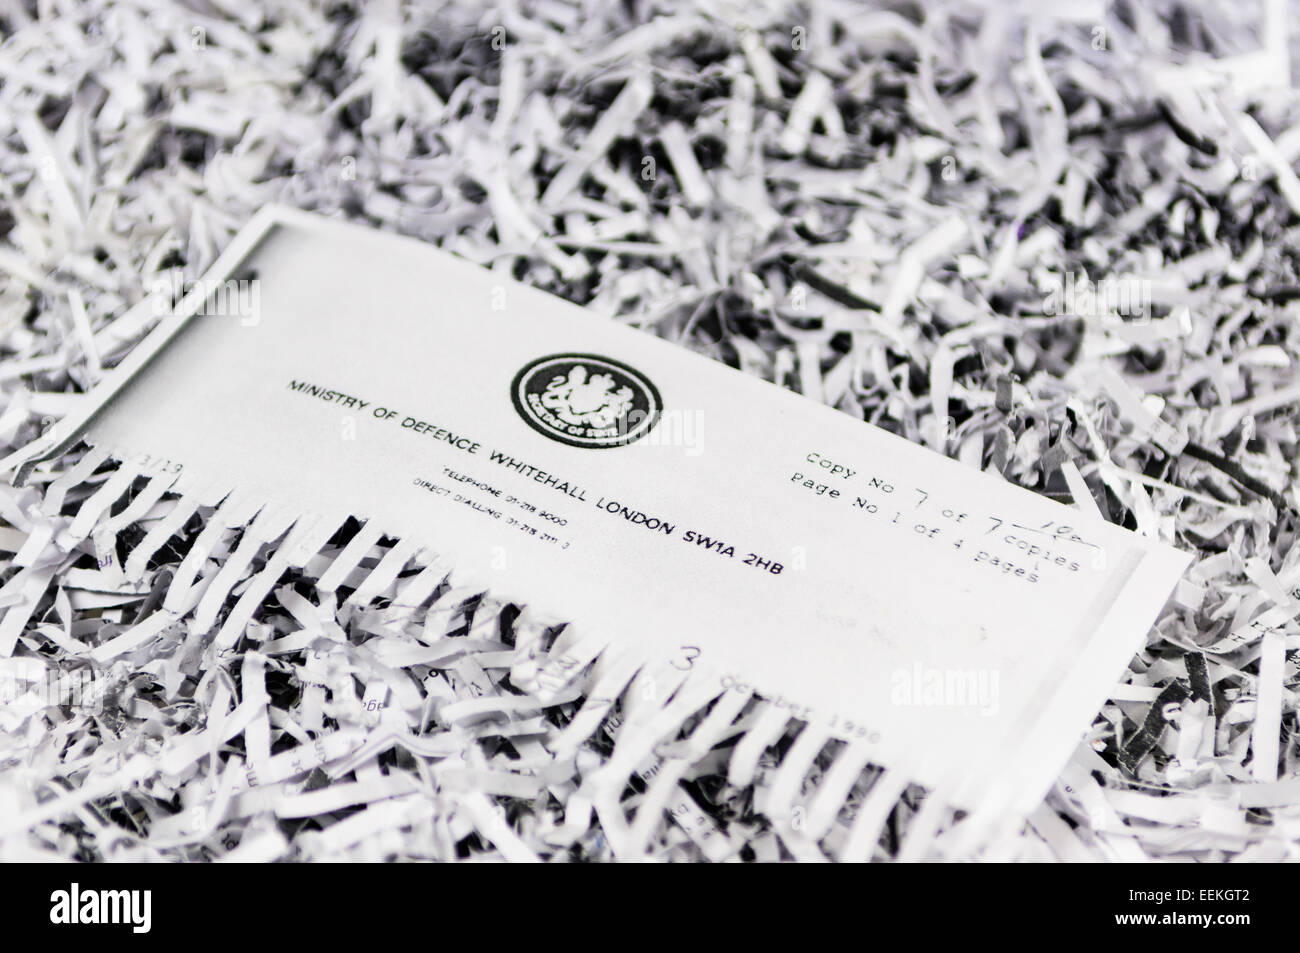 Half shredded classified letter from the UK Ministry of Defence Stock Photo